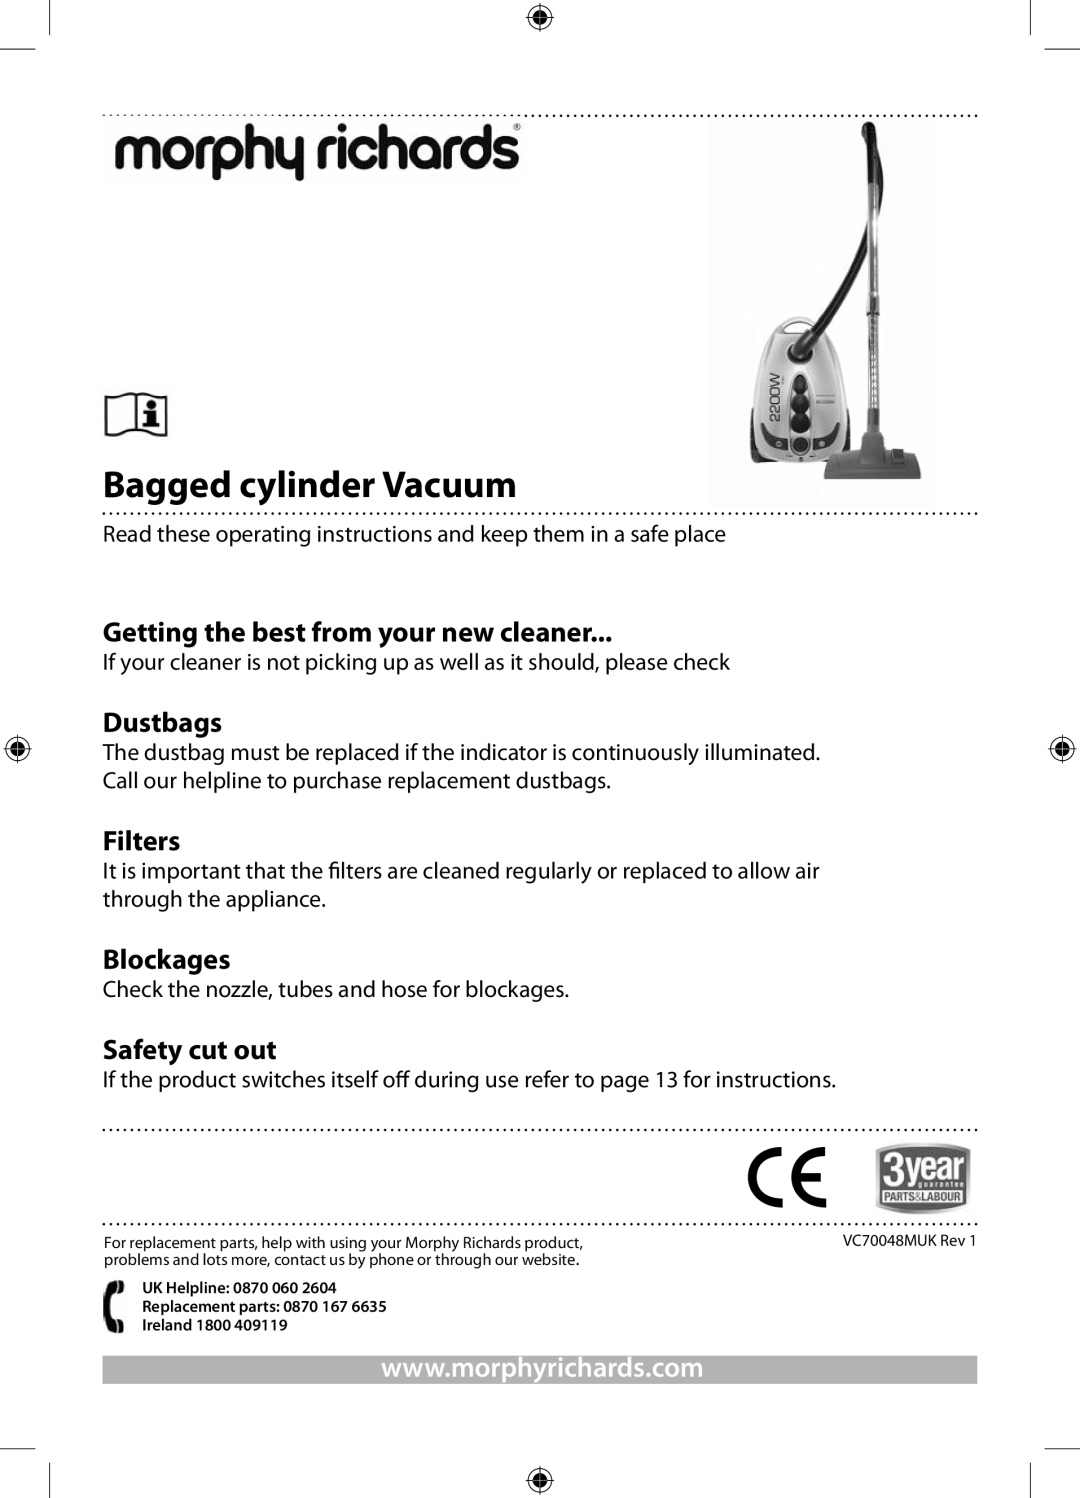 Morphy Richards Bagged cylinder Vacuum operating instructions Getting the best from your new cleaner, Dustbags, Filters 